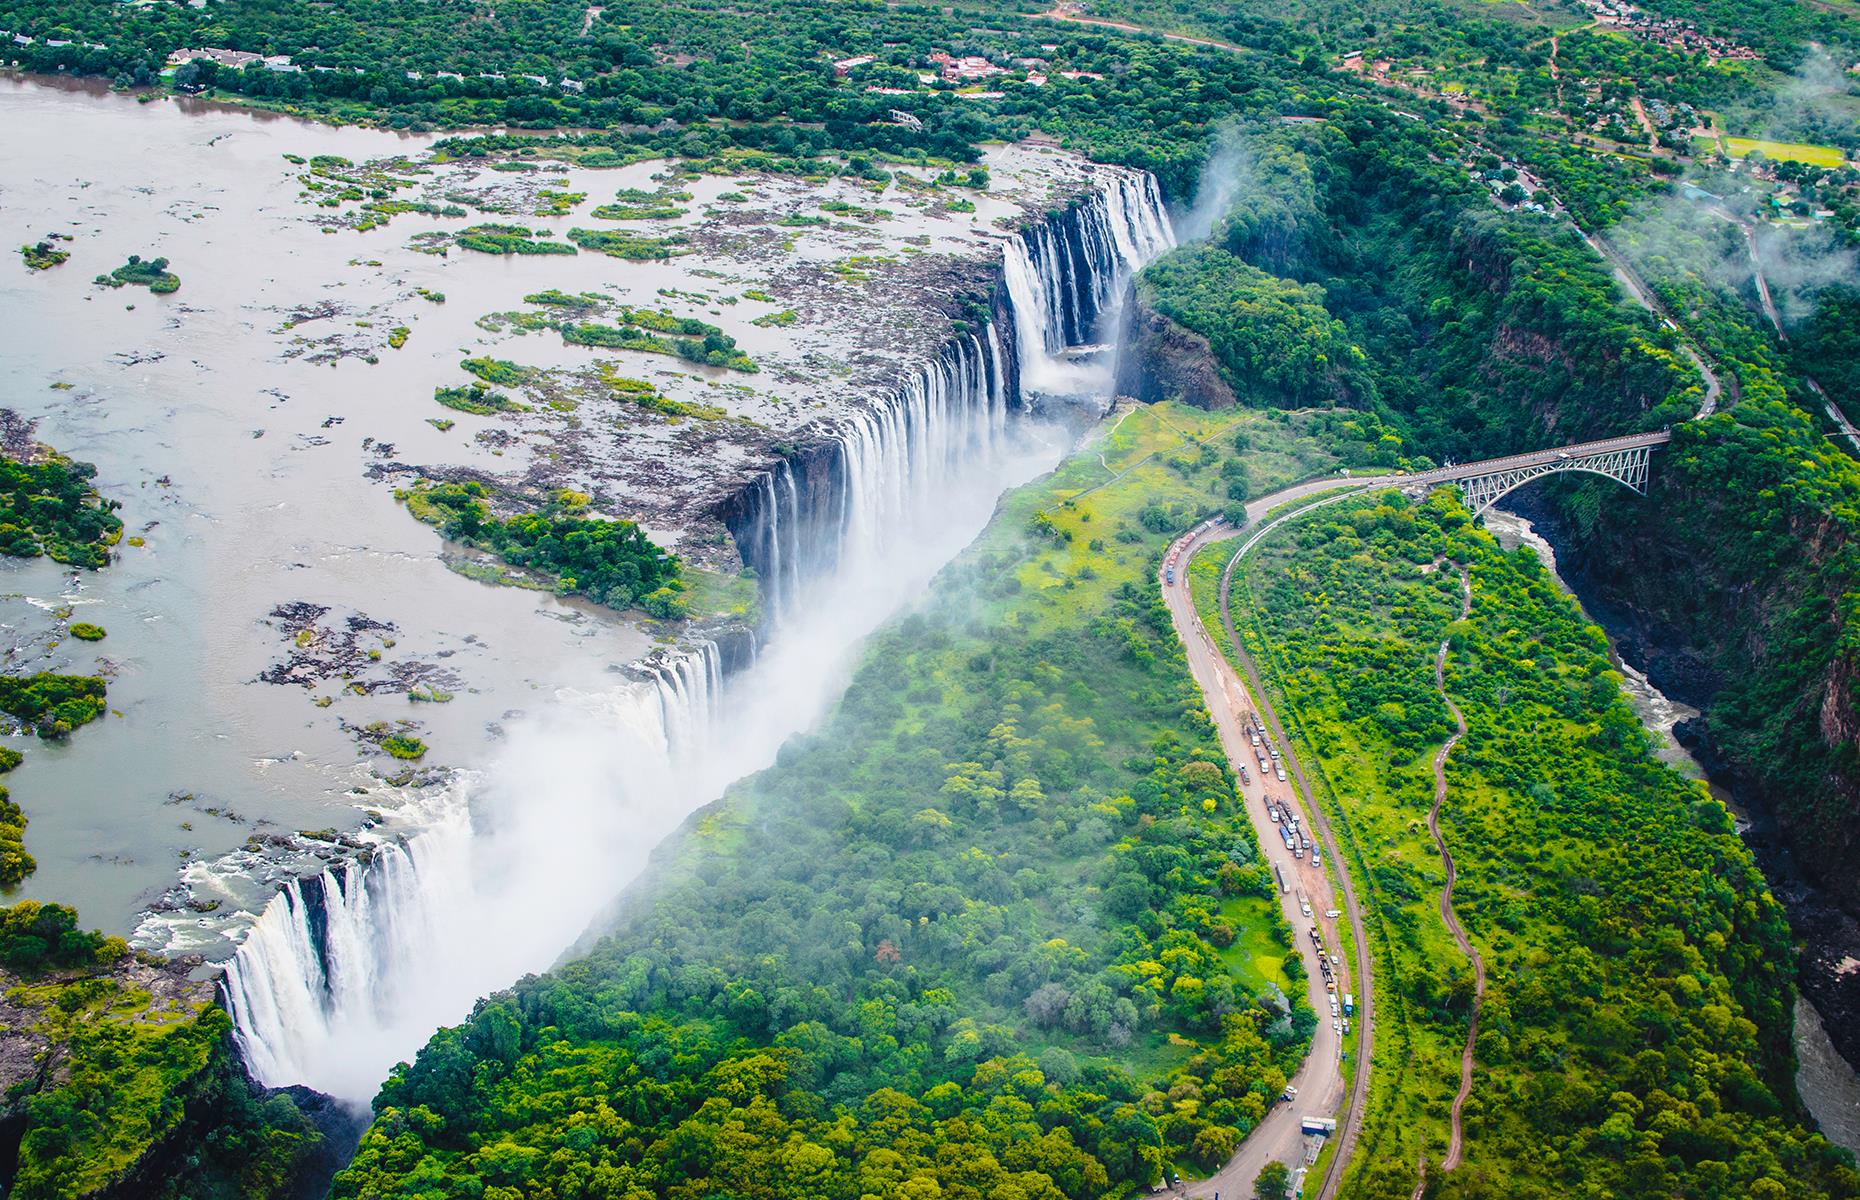 It may not be the world's highest or widest waterfall, but Victoria Falls, at the Zambian-Zimbabwean border, is definitely one of the planet's most dramatic. There's no better way to see it than soaring overhead in a helicopter, either.